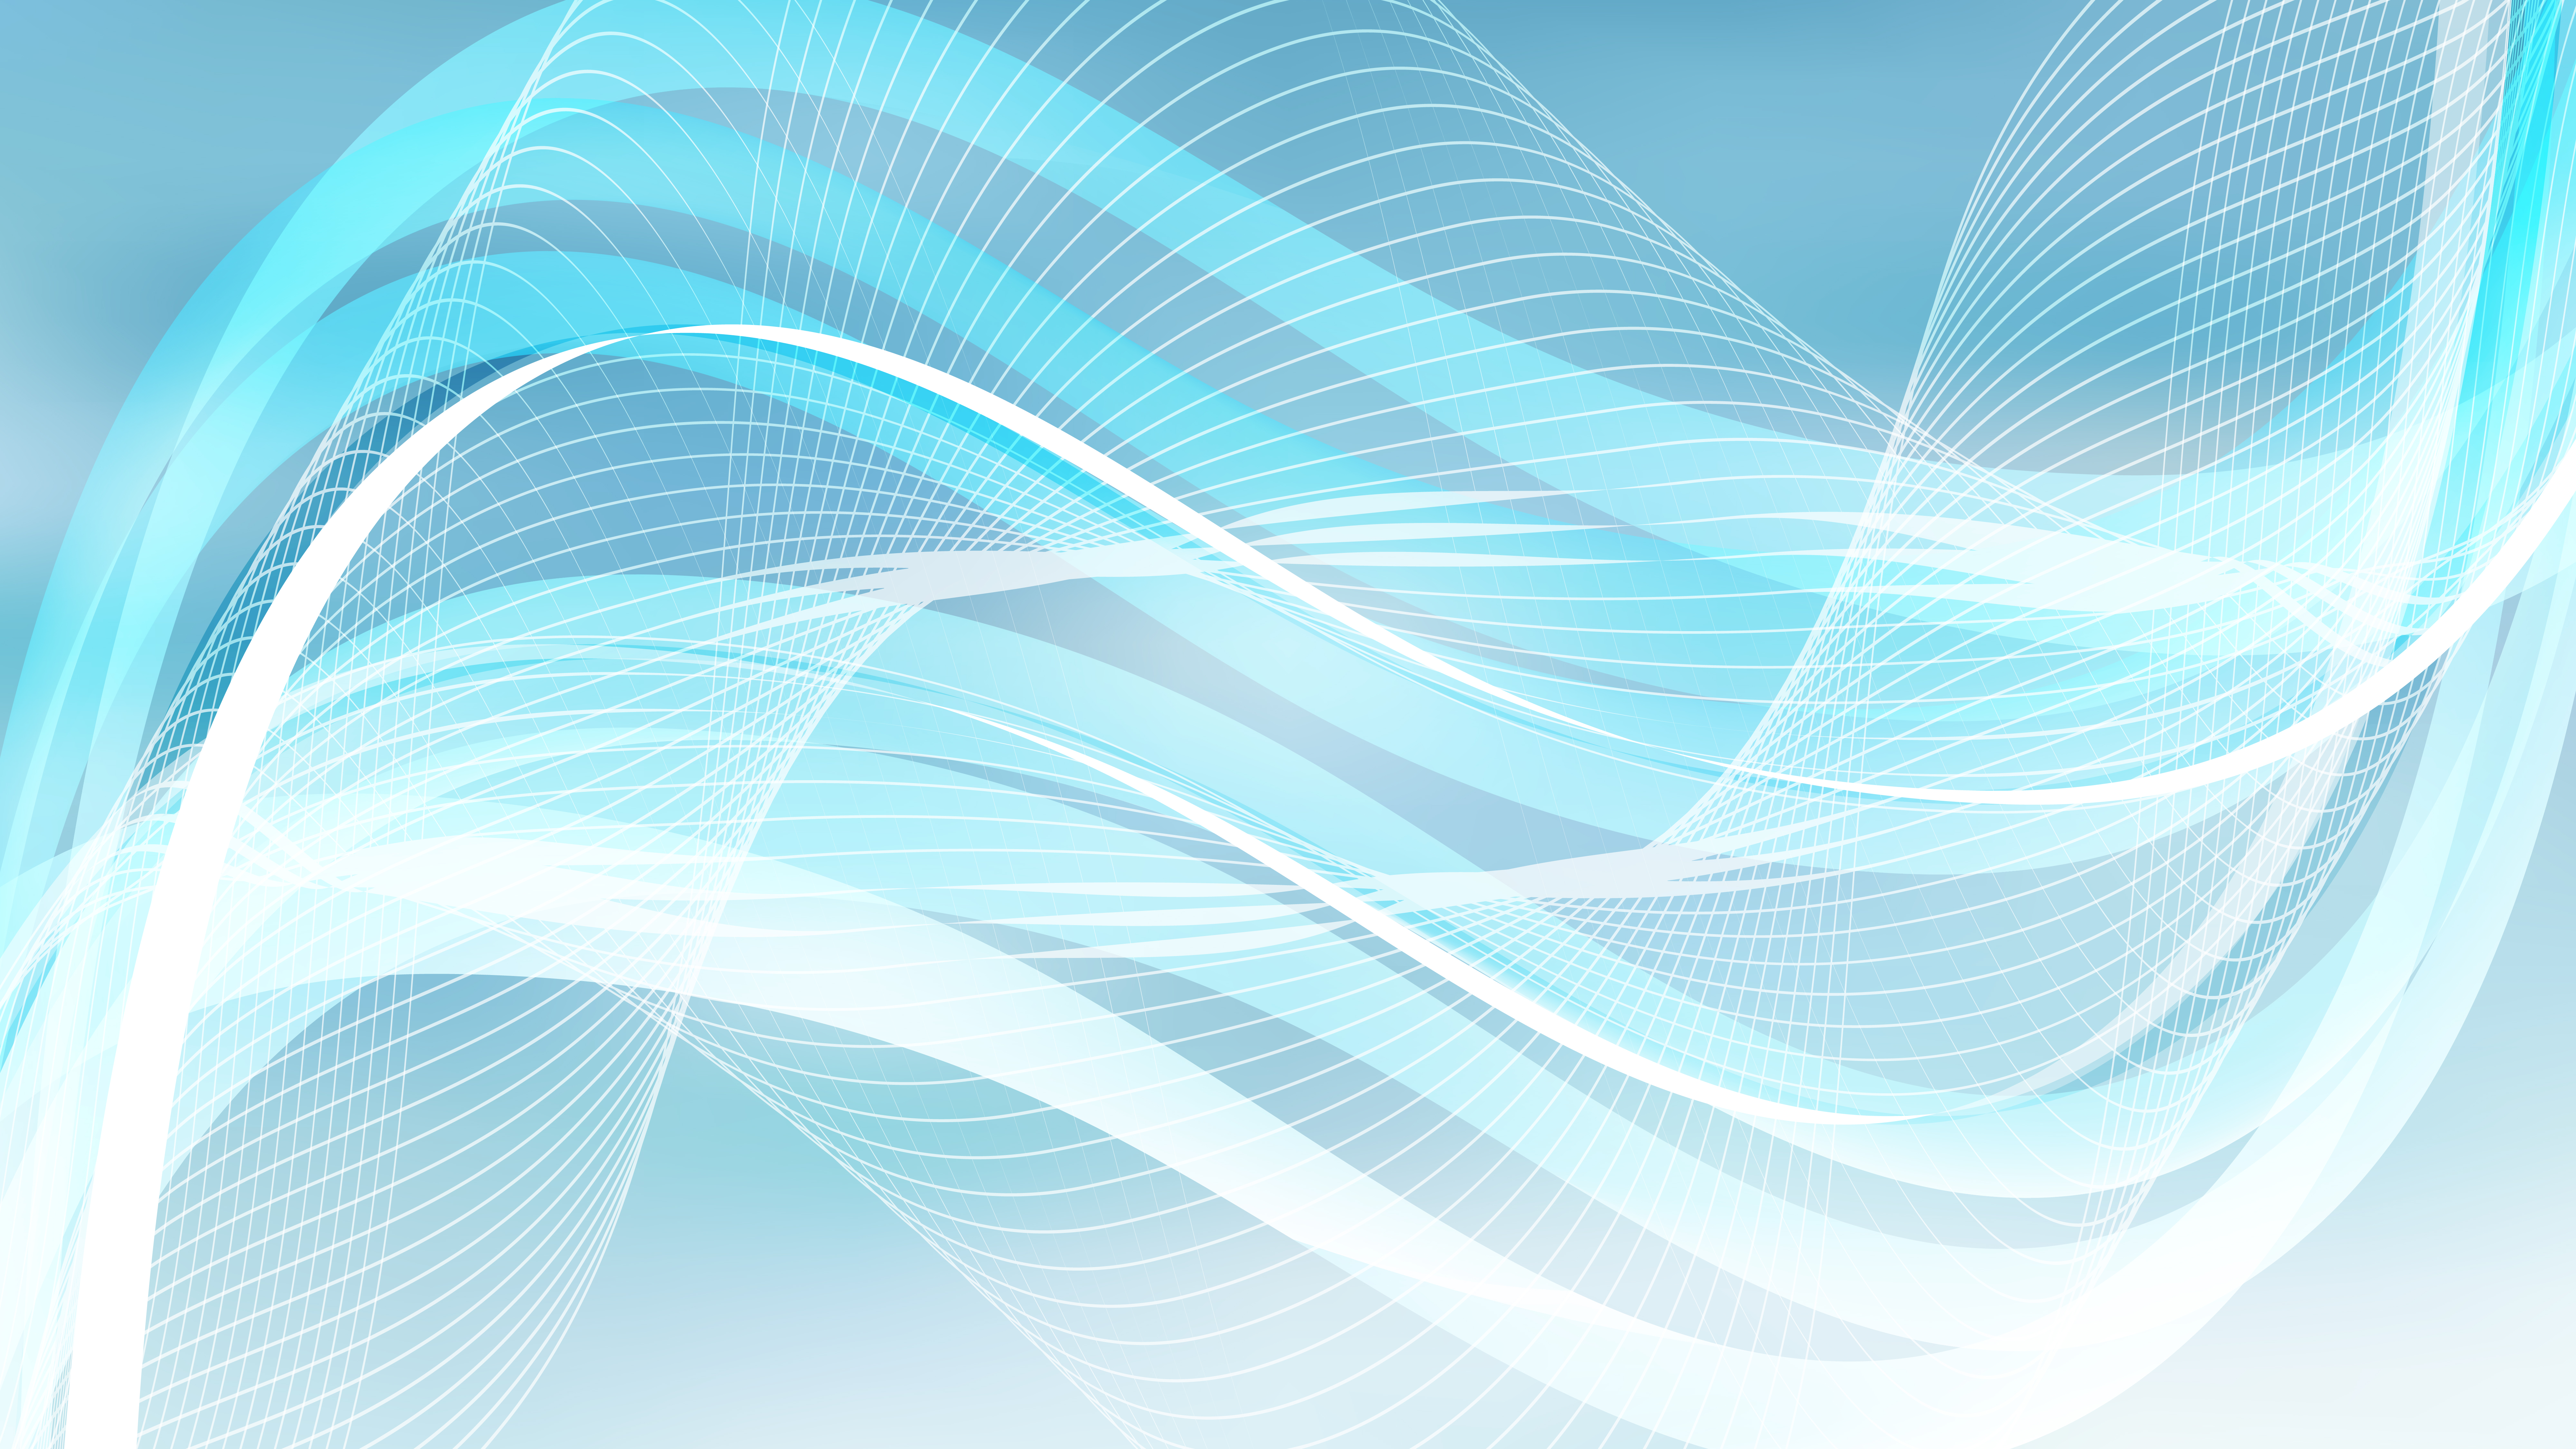 Free Blue and White Curved Lines Background Vector Illustration